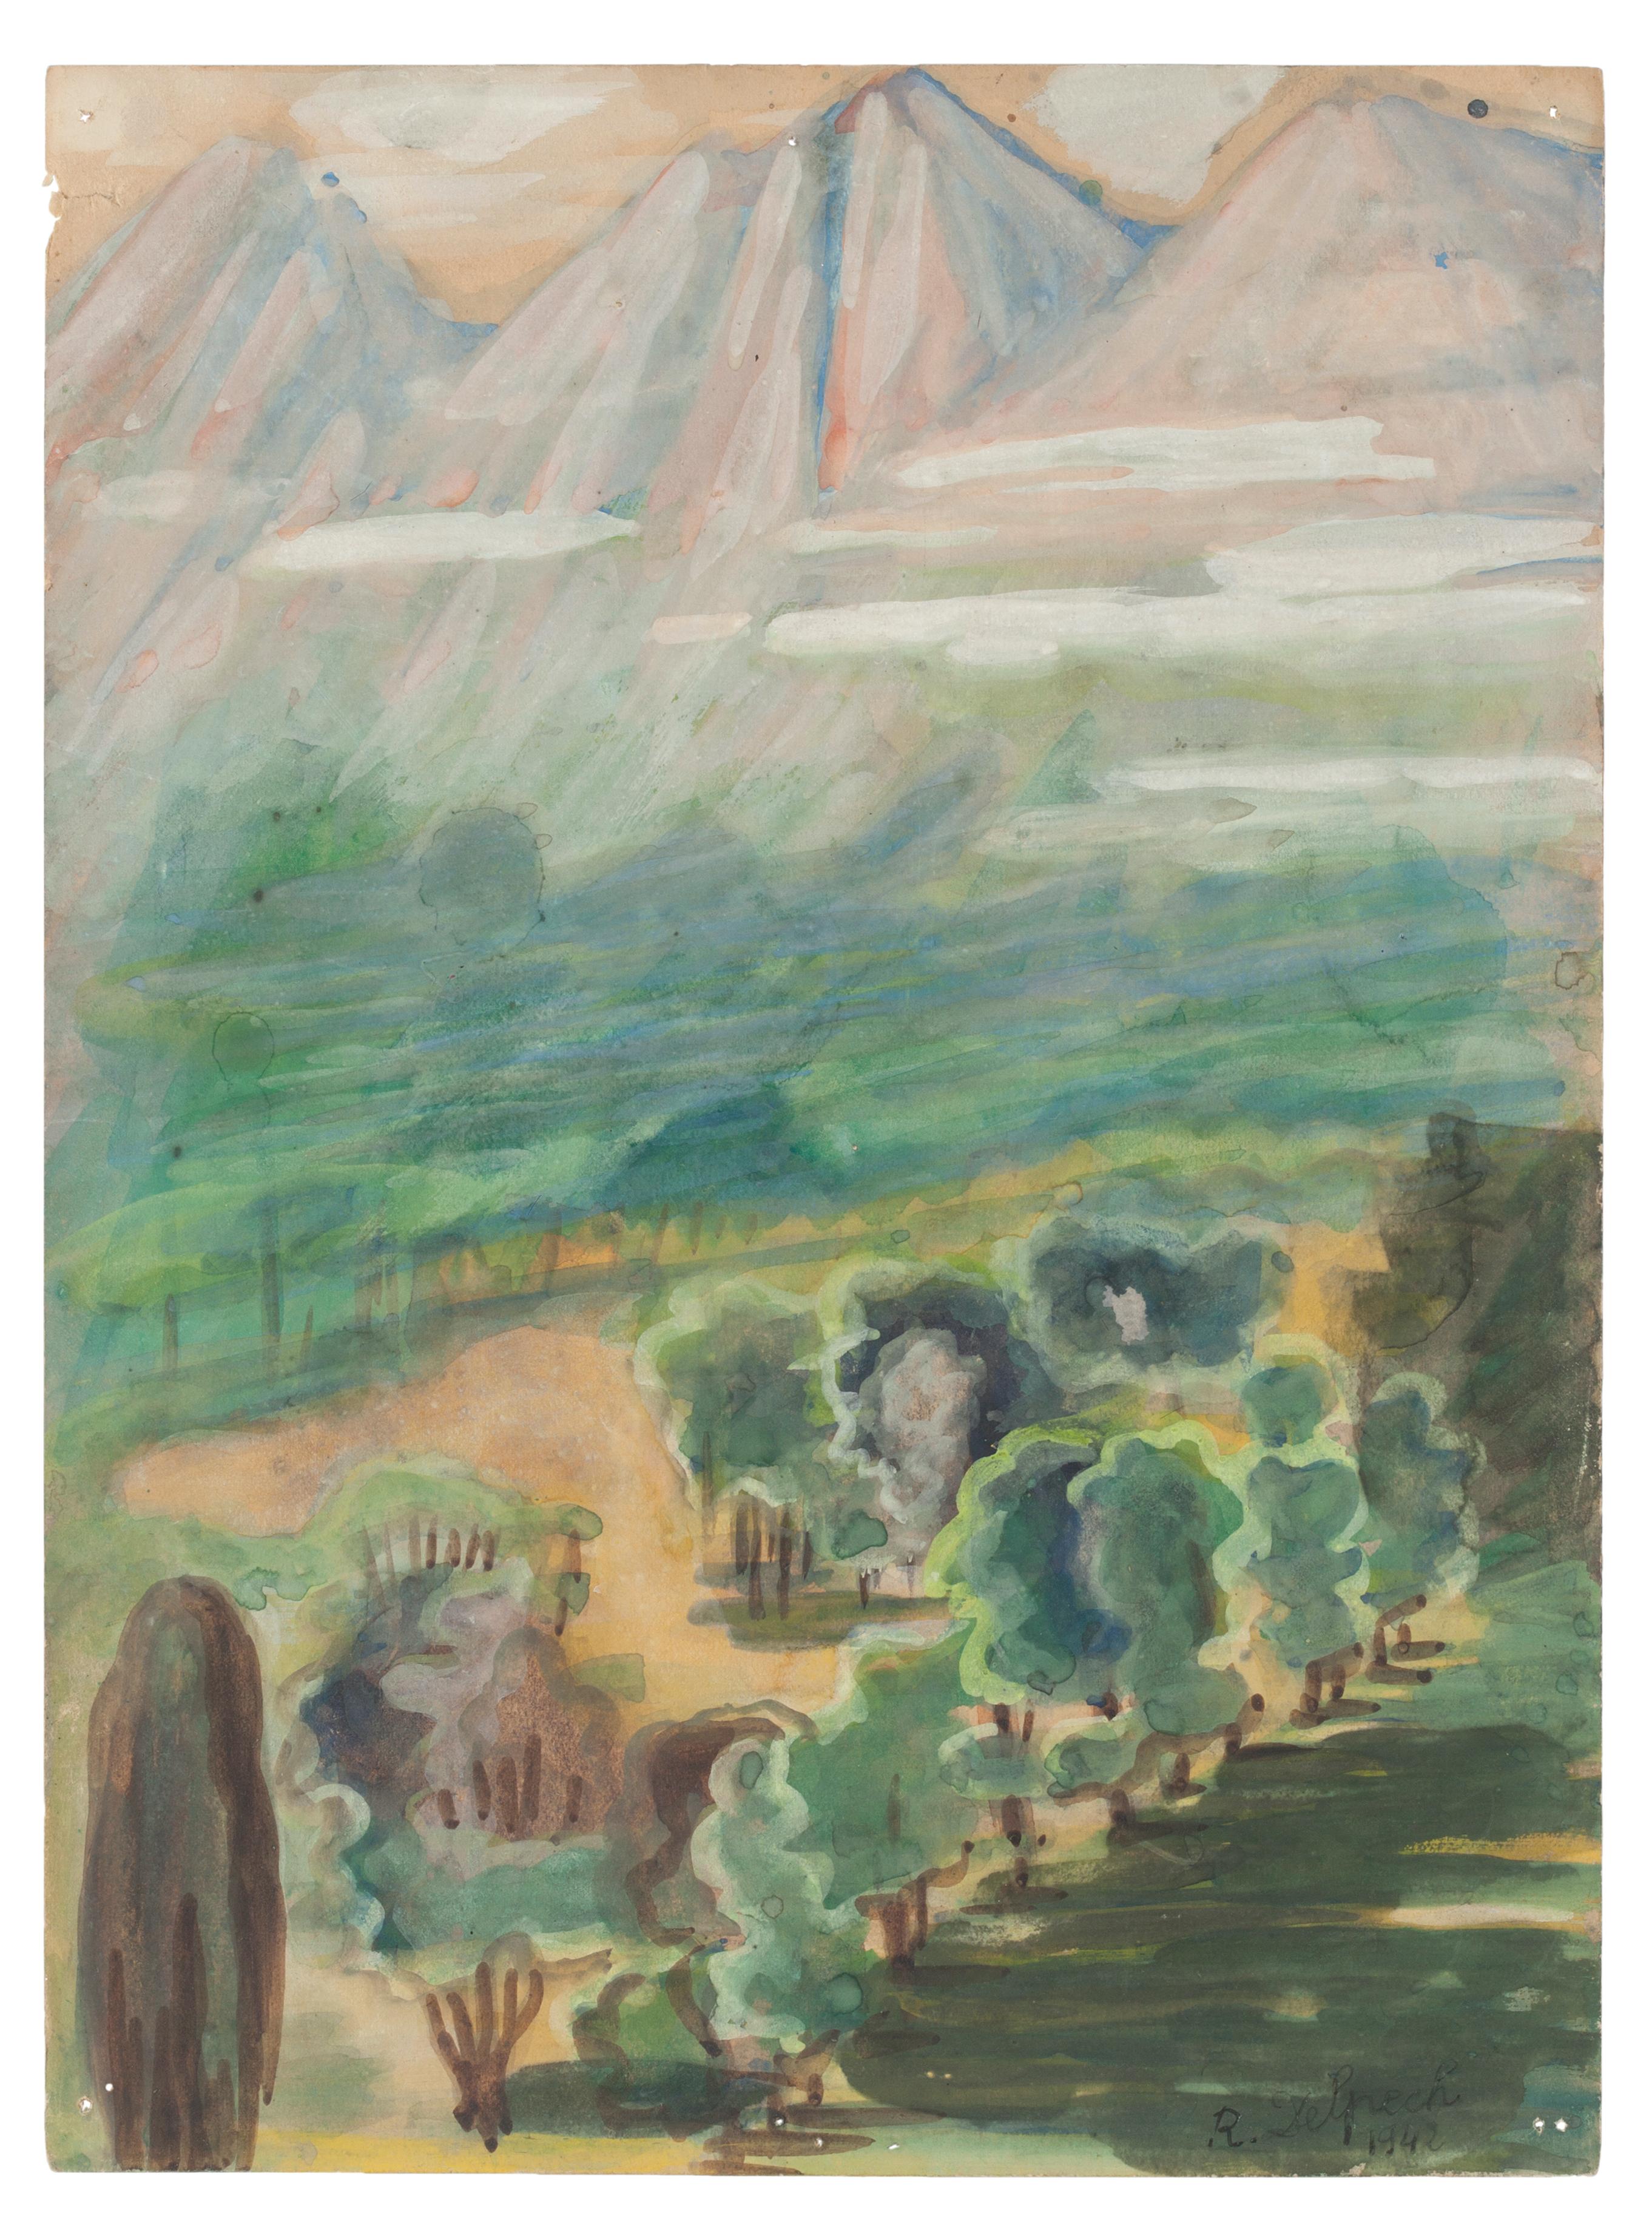 "Landscape" 1940's is a drawing in watercolor on paper, realized by Jean Delpech (1916-1988). 
The state of preservation of the artwork is very good.

Sheet dimension: 26.5 x 19.6  cm.

The artwork represents beautiful landscape with vivid color,